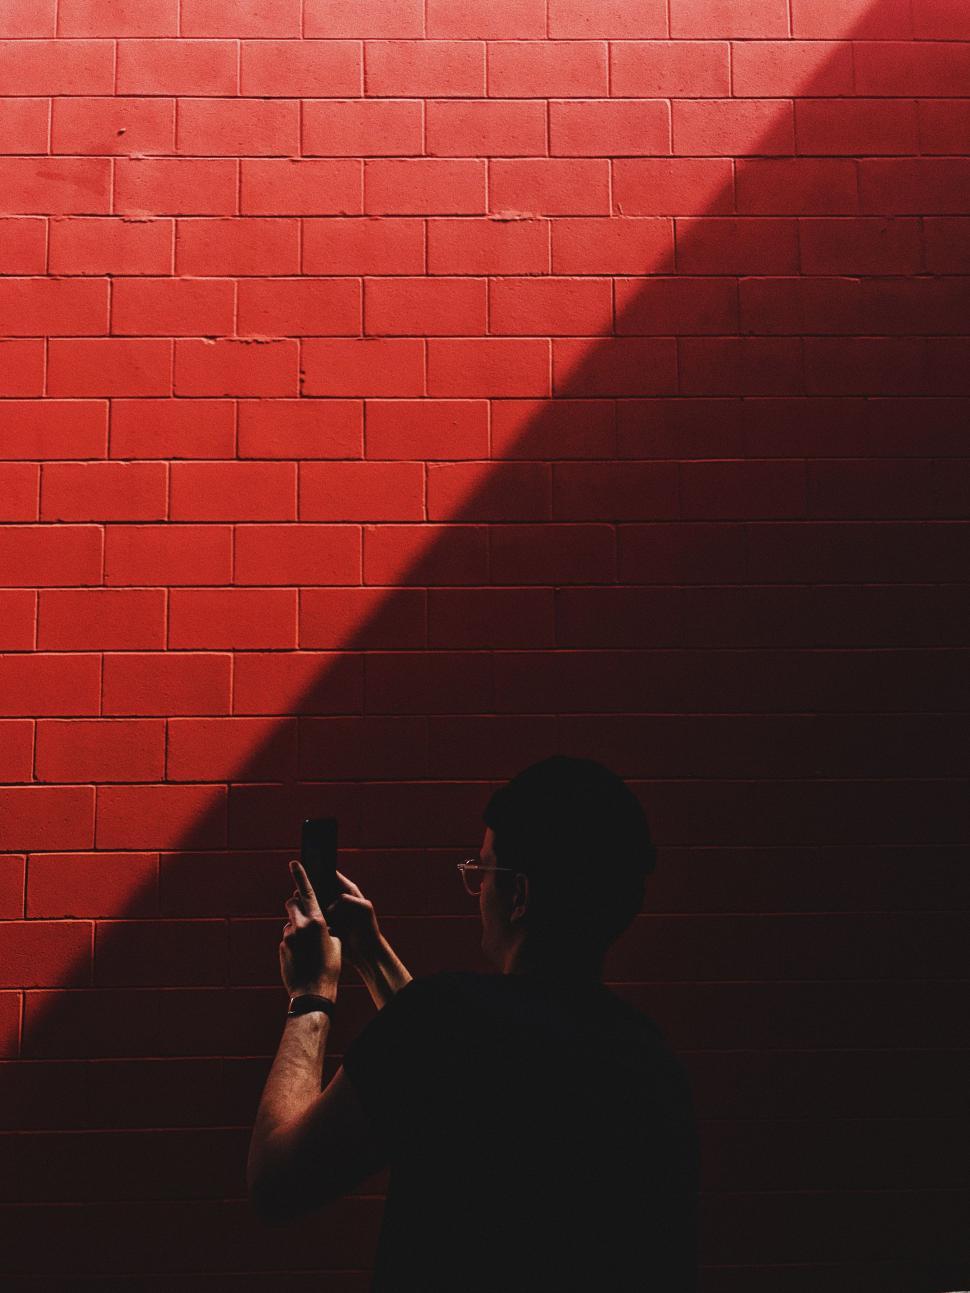 Free Image of Man Standing in Front of Brick Wall Holding Cell Phone 